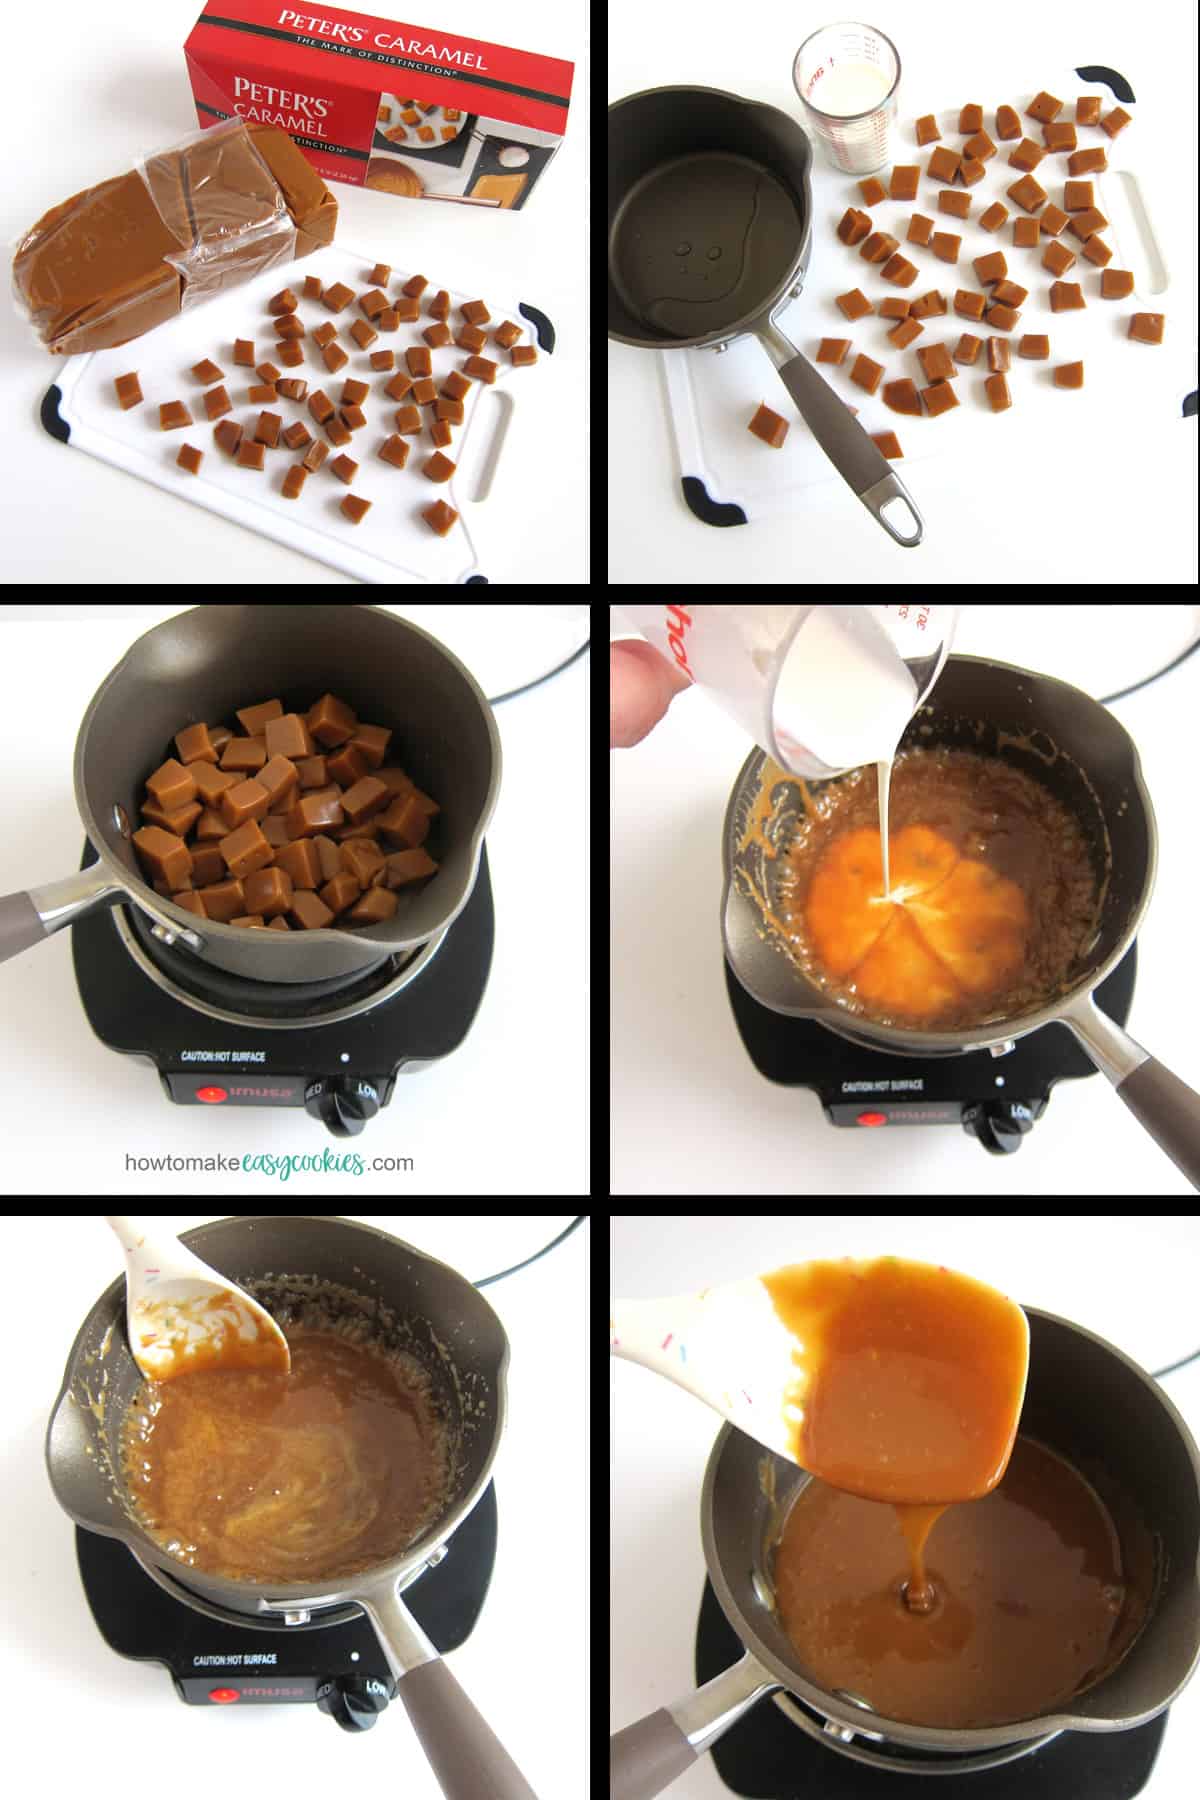 making easy caramel sauce by melting Peter's caramel with water and heavy whipping cream